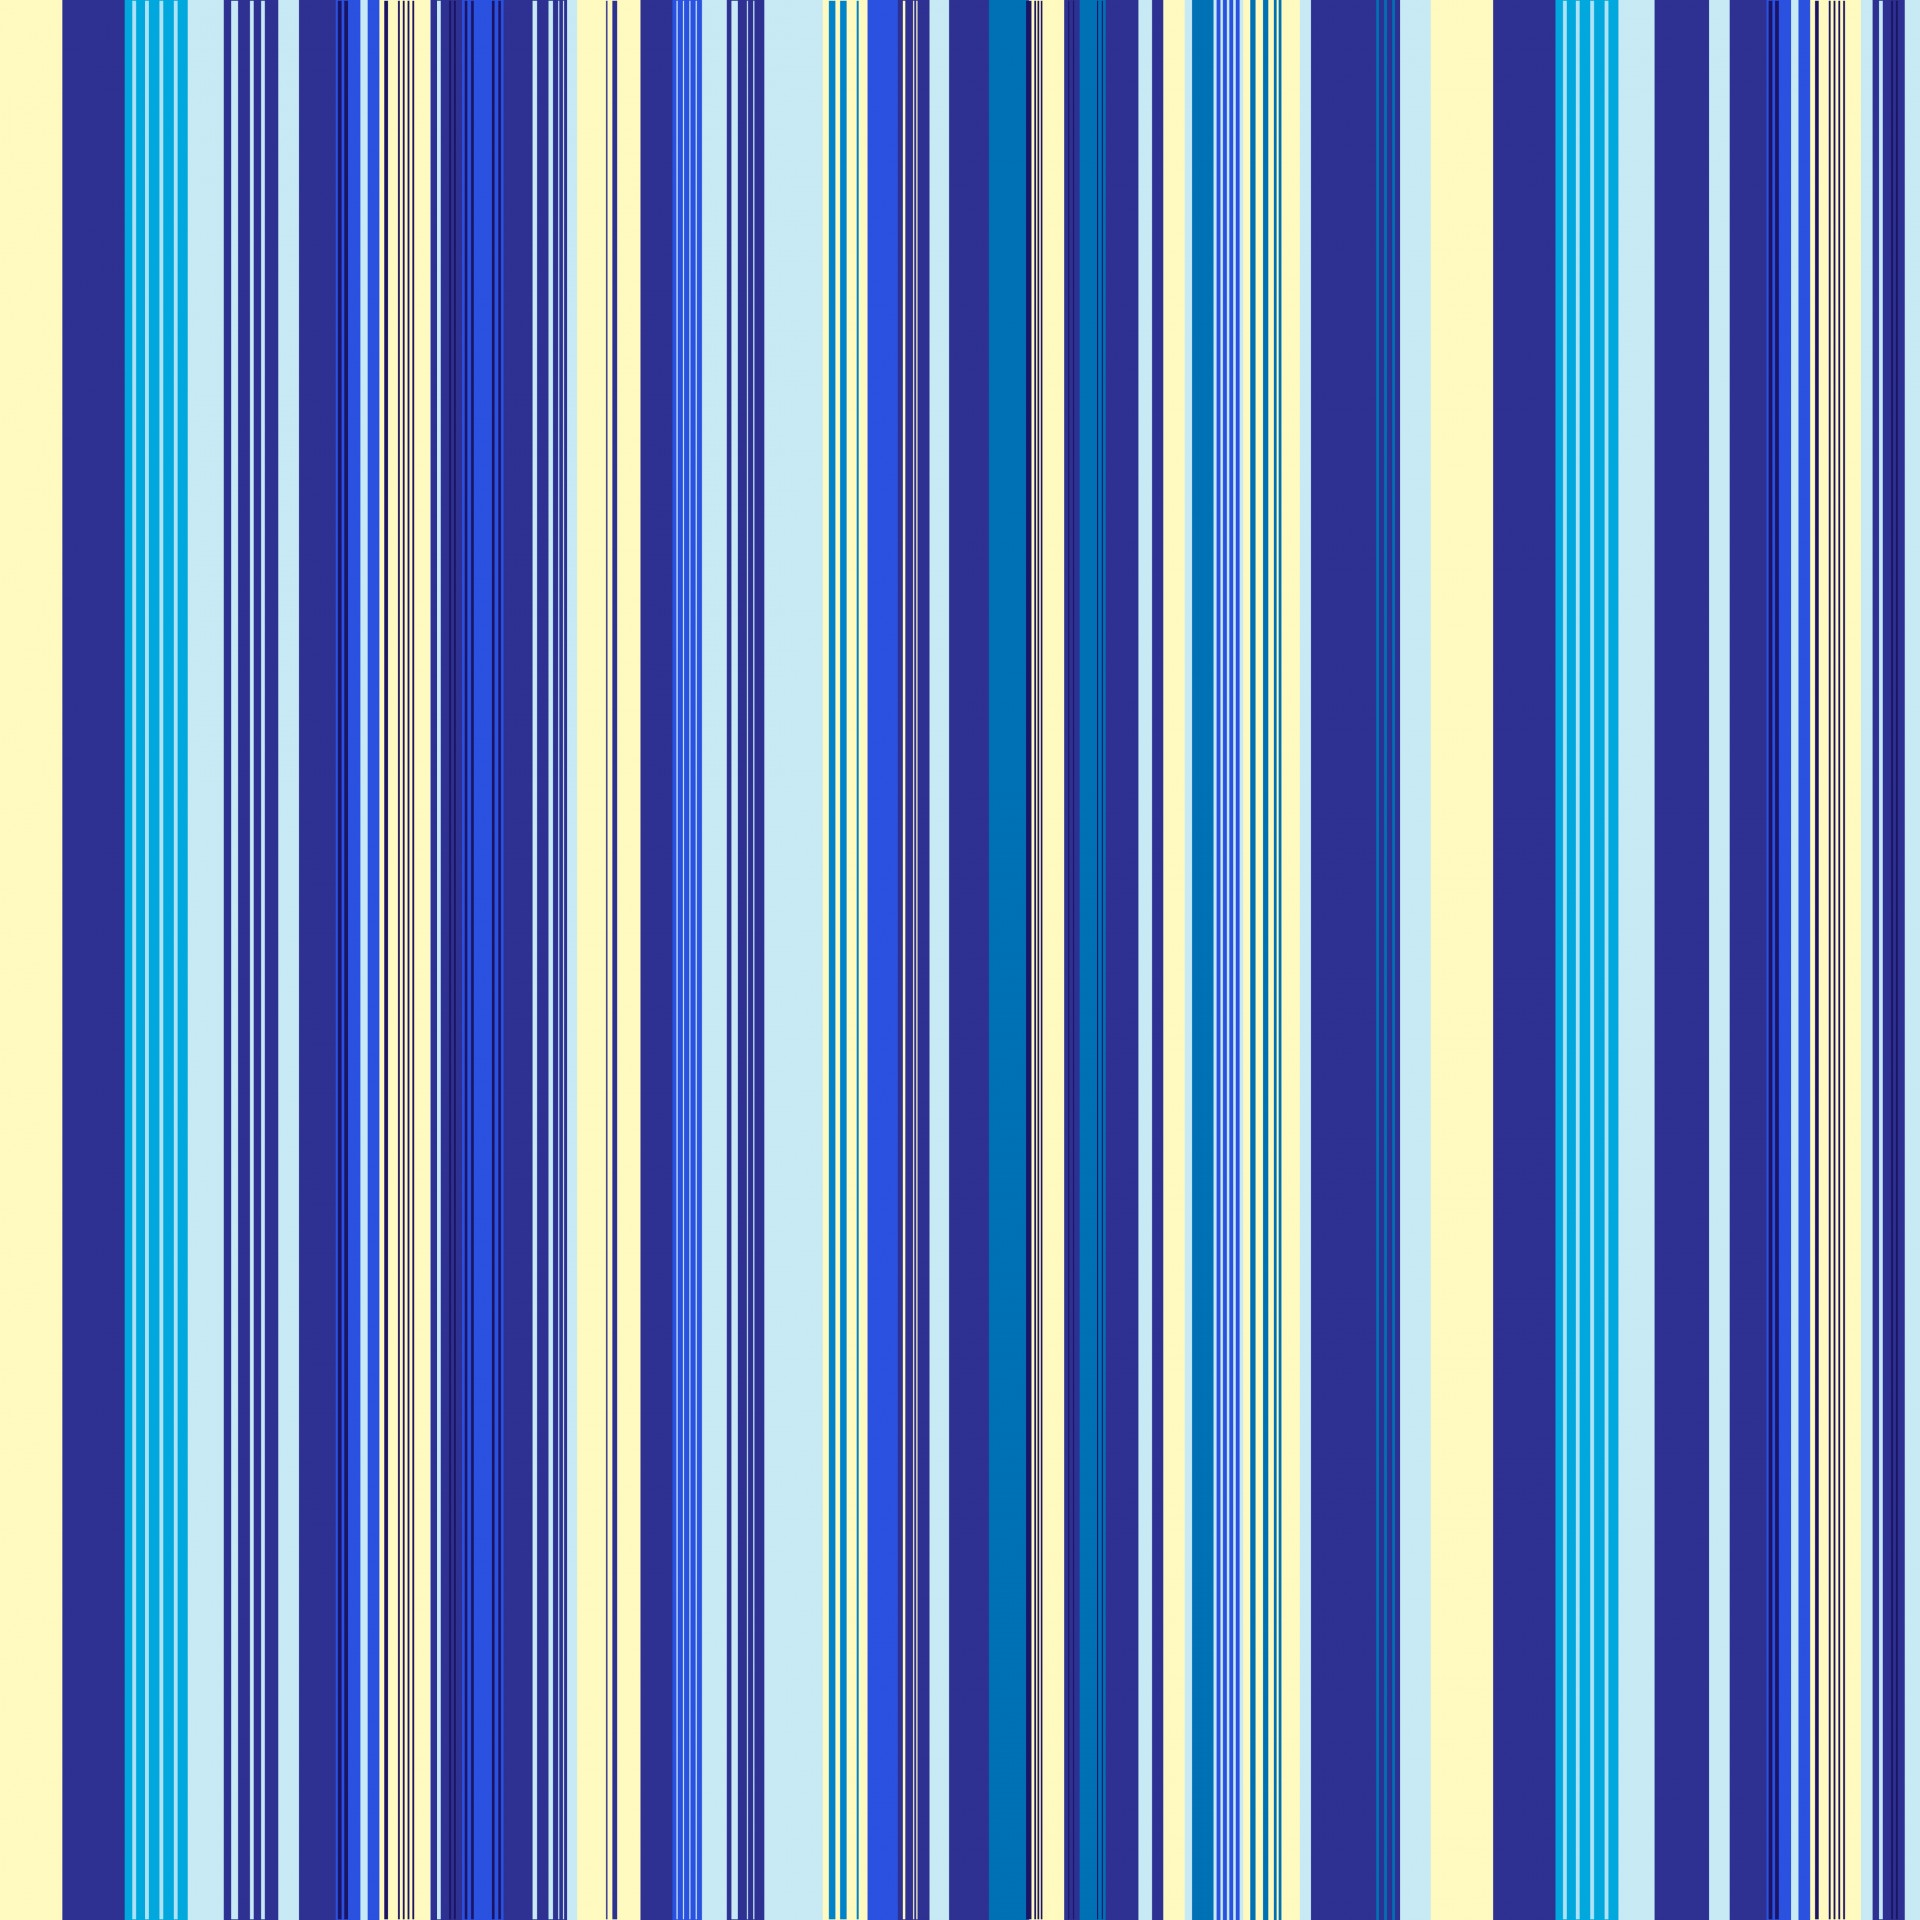 Stripes,striped,blue,yellow,background - free image from 